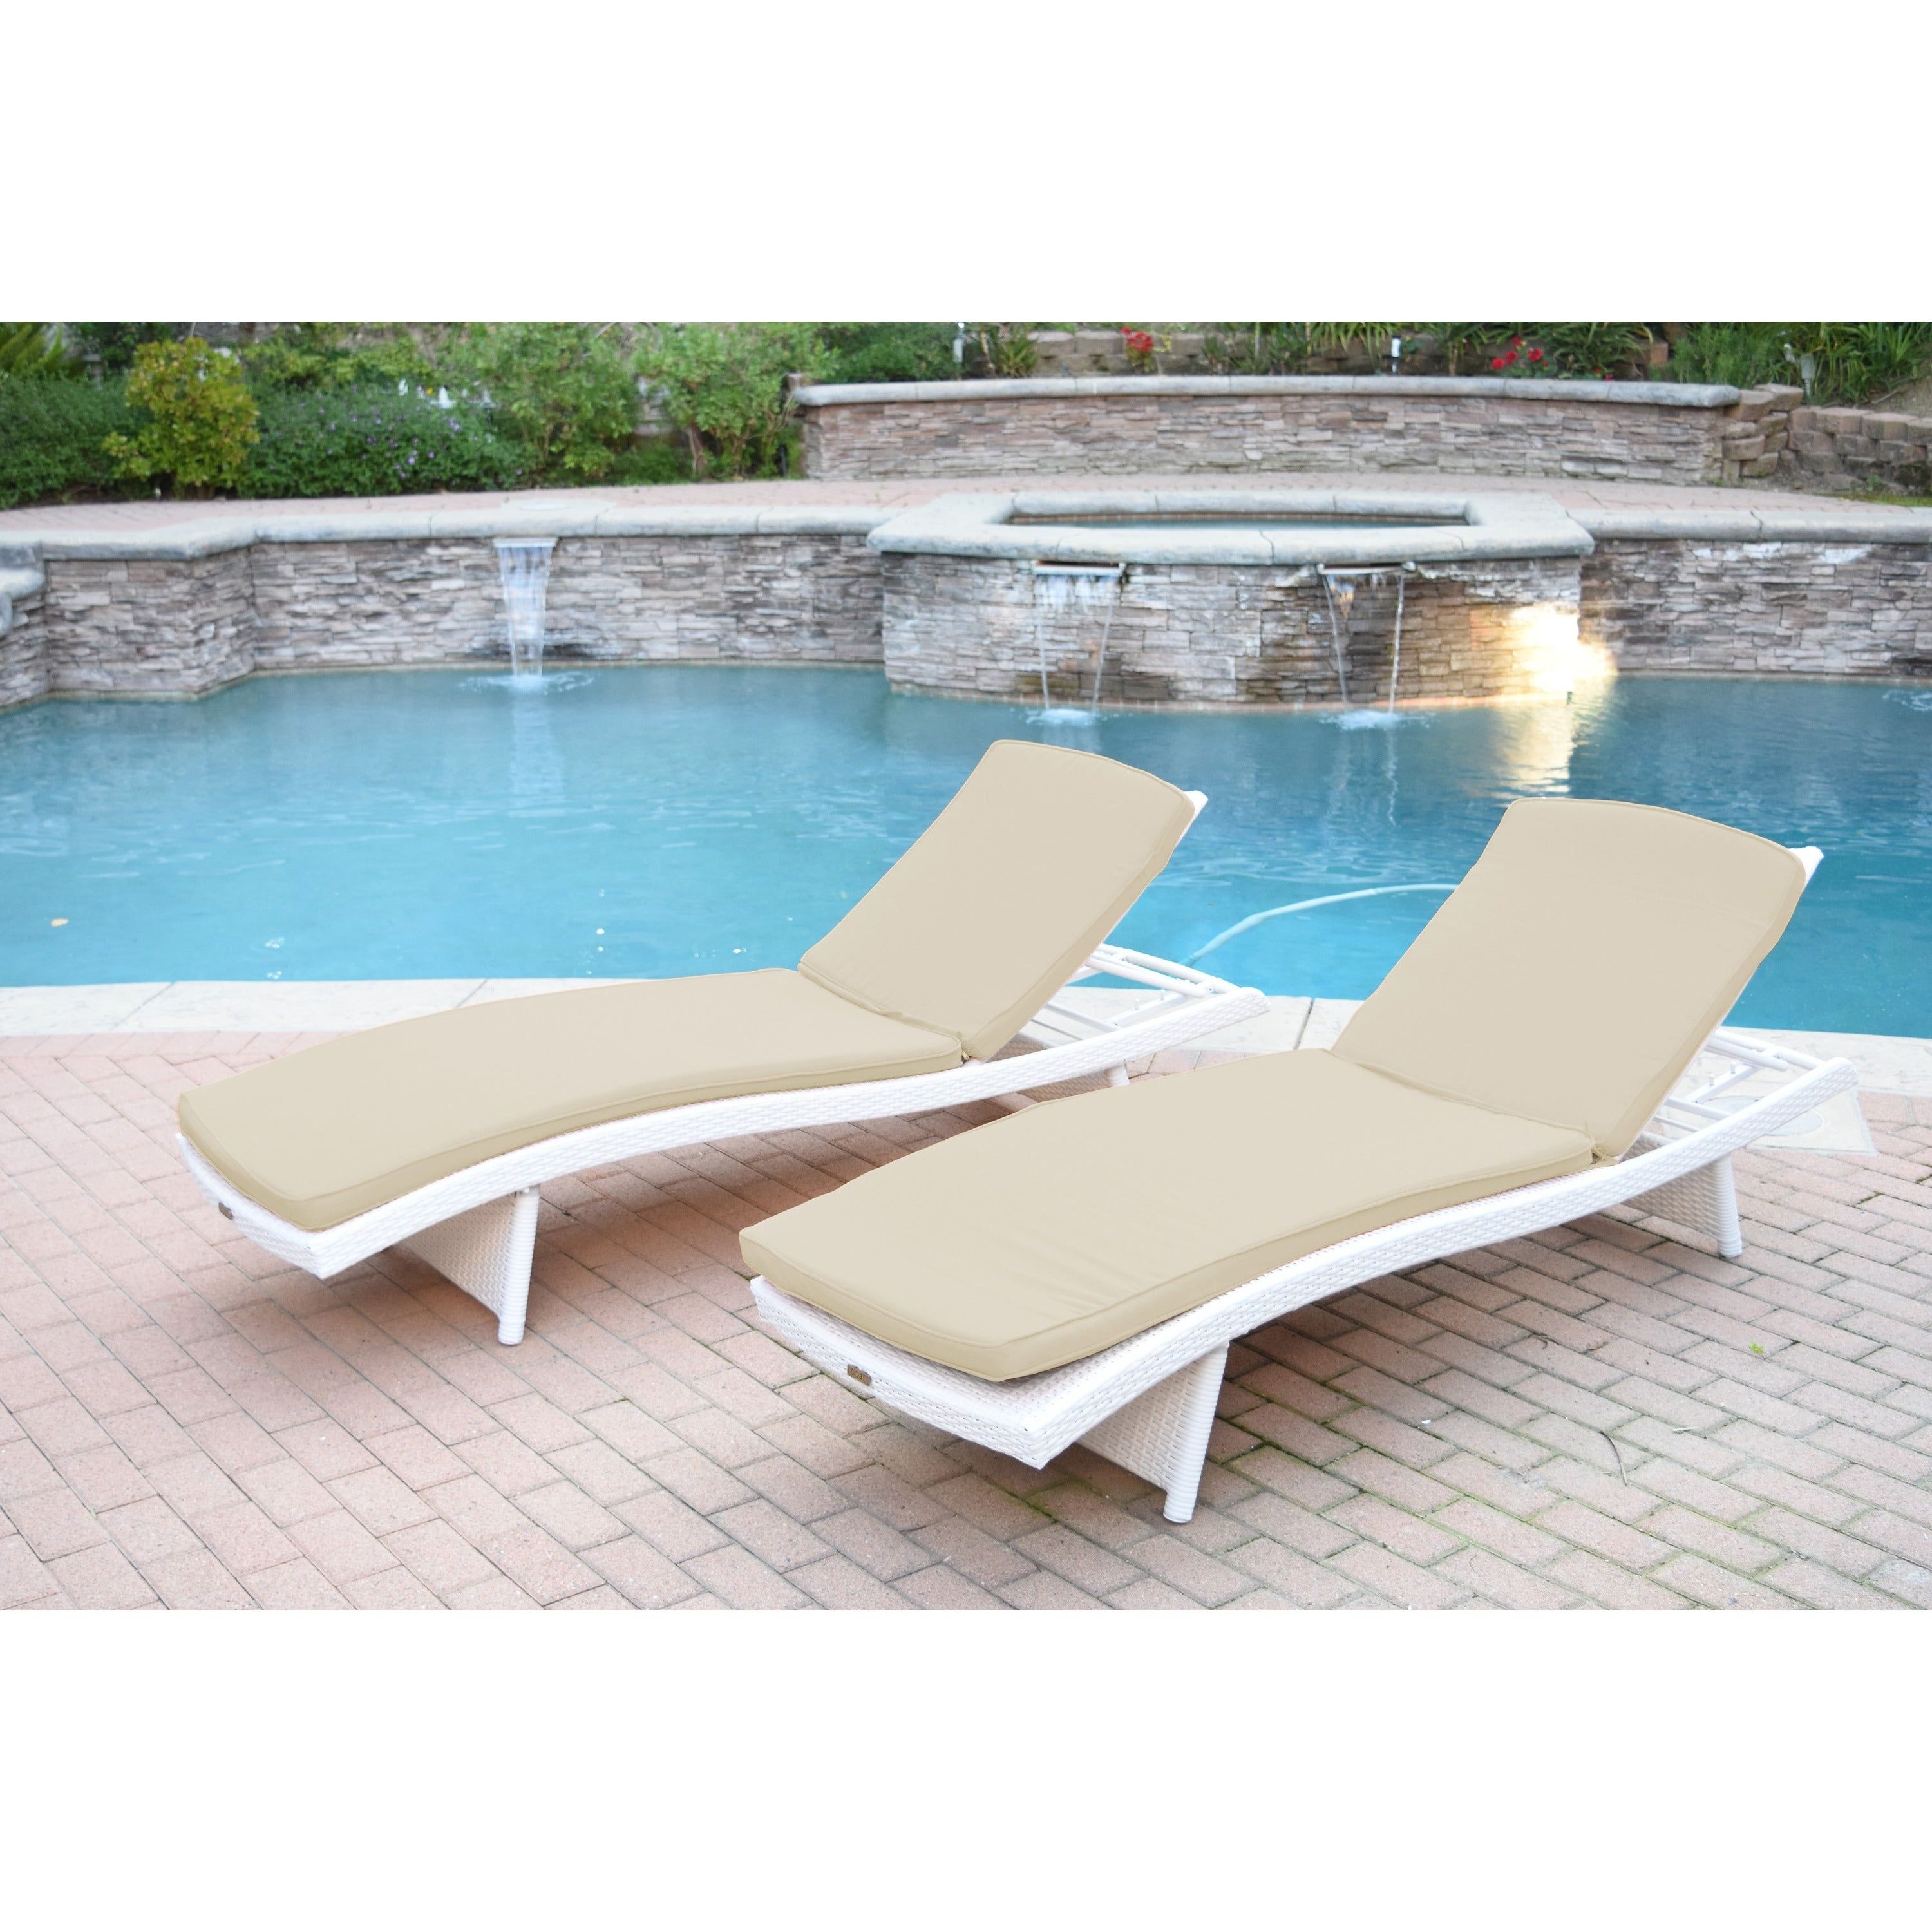 White Wicker Adjustable Chaise Lounger With Cushions (set Of 2) Intended For Most Popular Wicker Adjustable Chaise Loungers With Cushion (View 5 of 25)